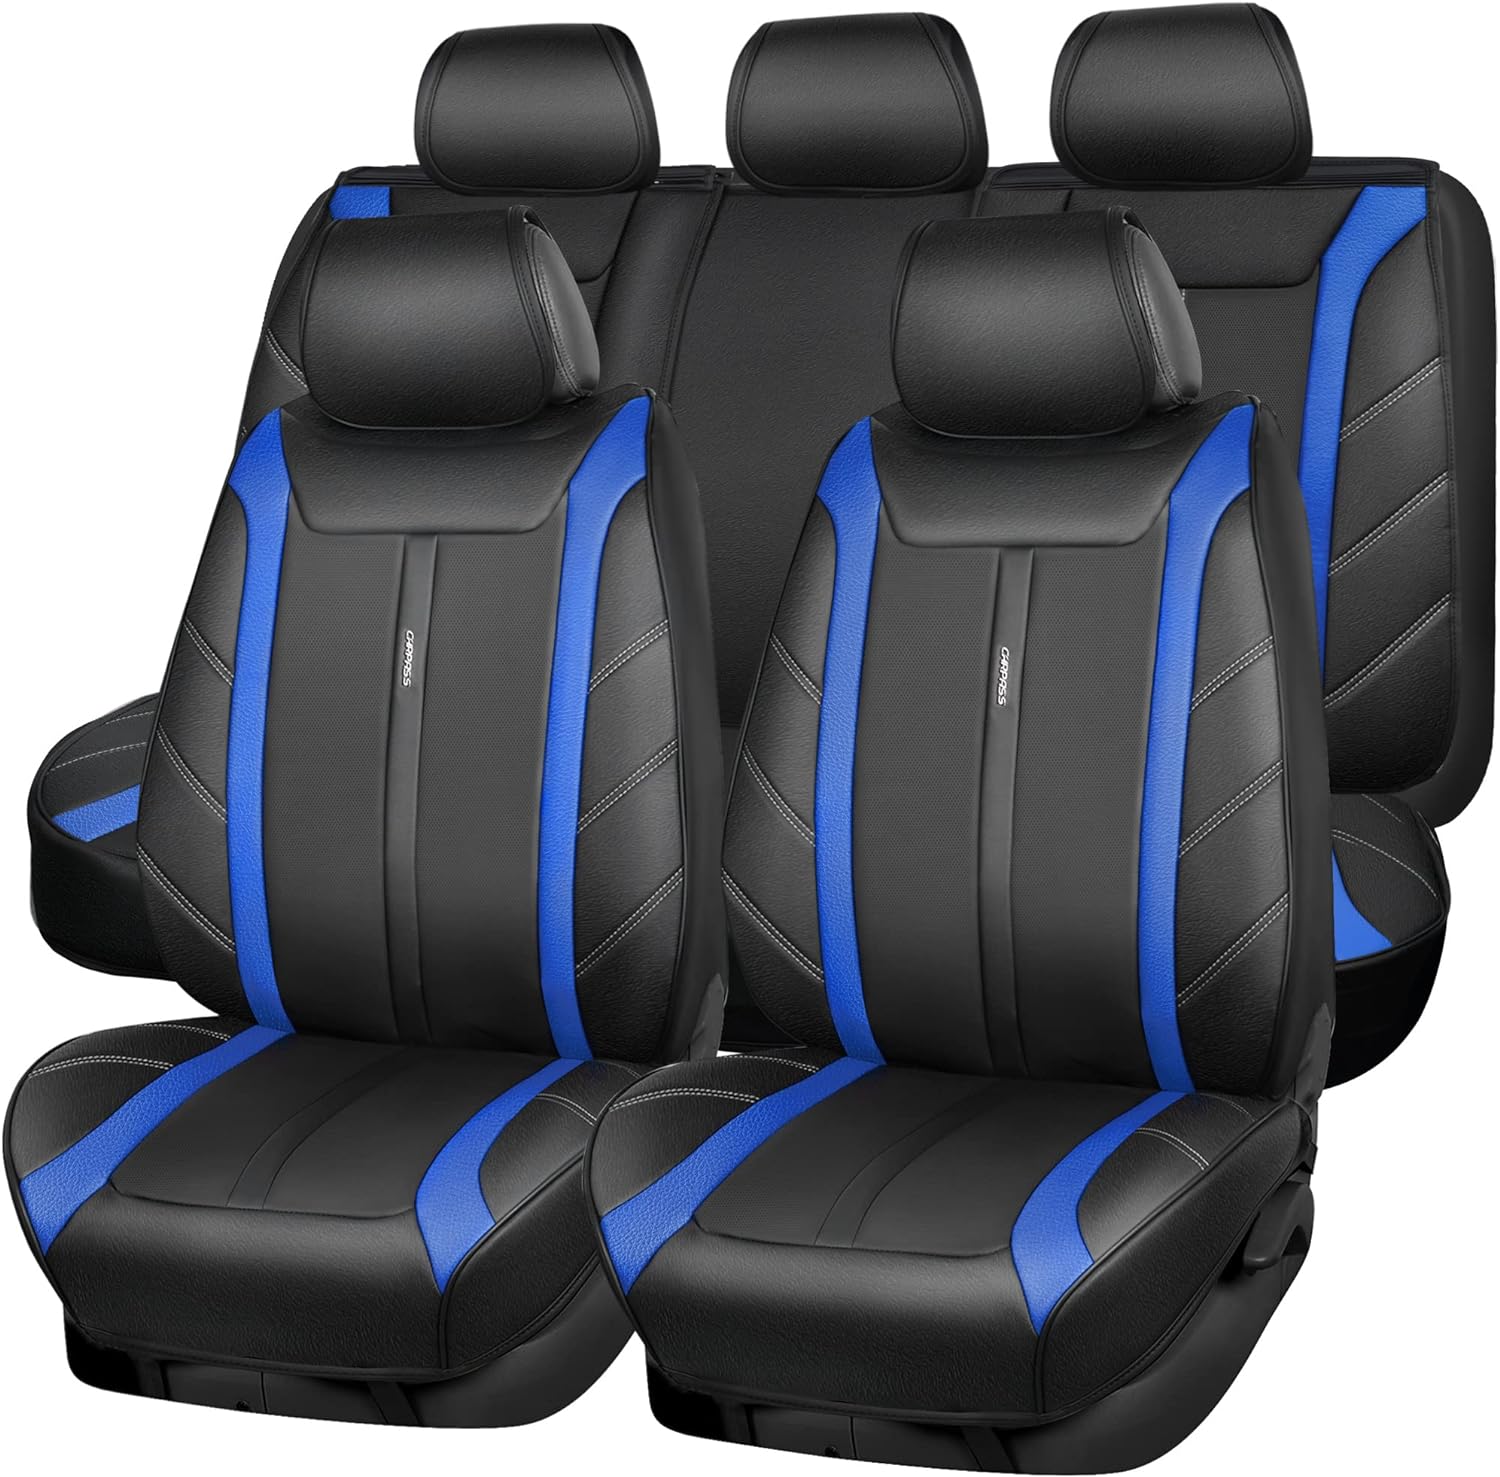 CAR PASS Line Rider Microfiber Leather Sporty 14.5-15inch Steering Wheel Cover and 5 Seats Luxury Leather Seat Covers Full Set Fit for Most Vehicle Sedan Van SUV Cars(Black-Blue)